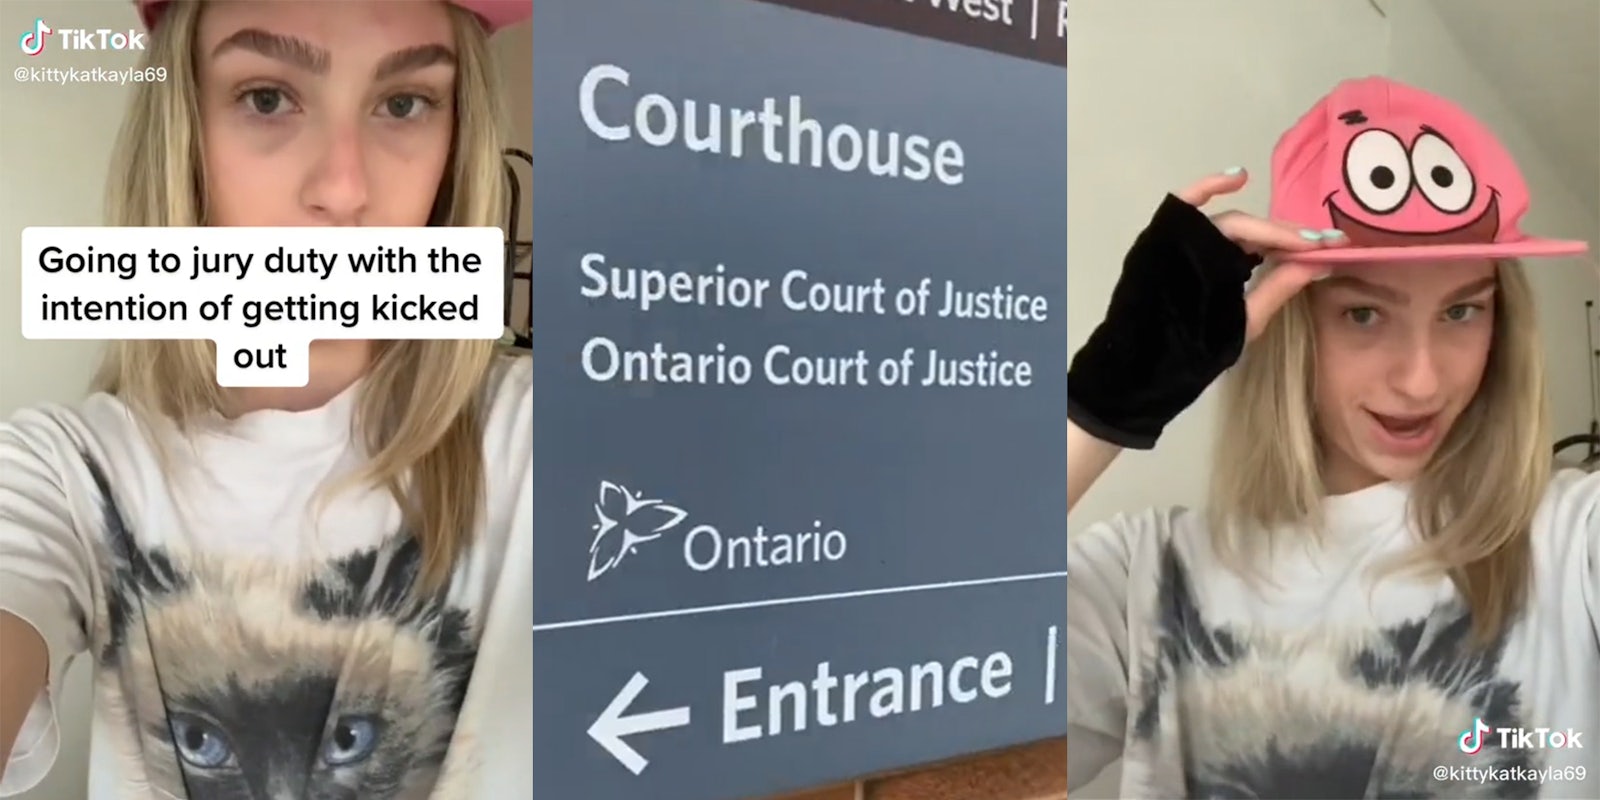 young woman with Patrick Star hat, airbrushed cat t-shirt and fingerless gloves (l&r) Courthouse - Superior Court of Justice, Ontario Court of Justice, Ontario, Entrance sign (c) caption 'Going to jury duty with the intention of gettting kicked out'